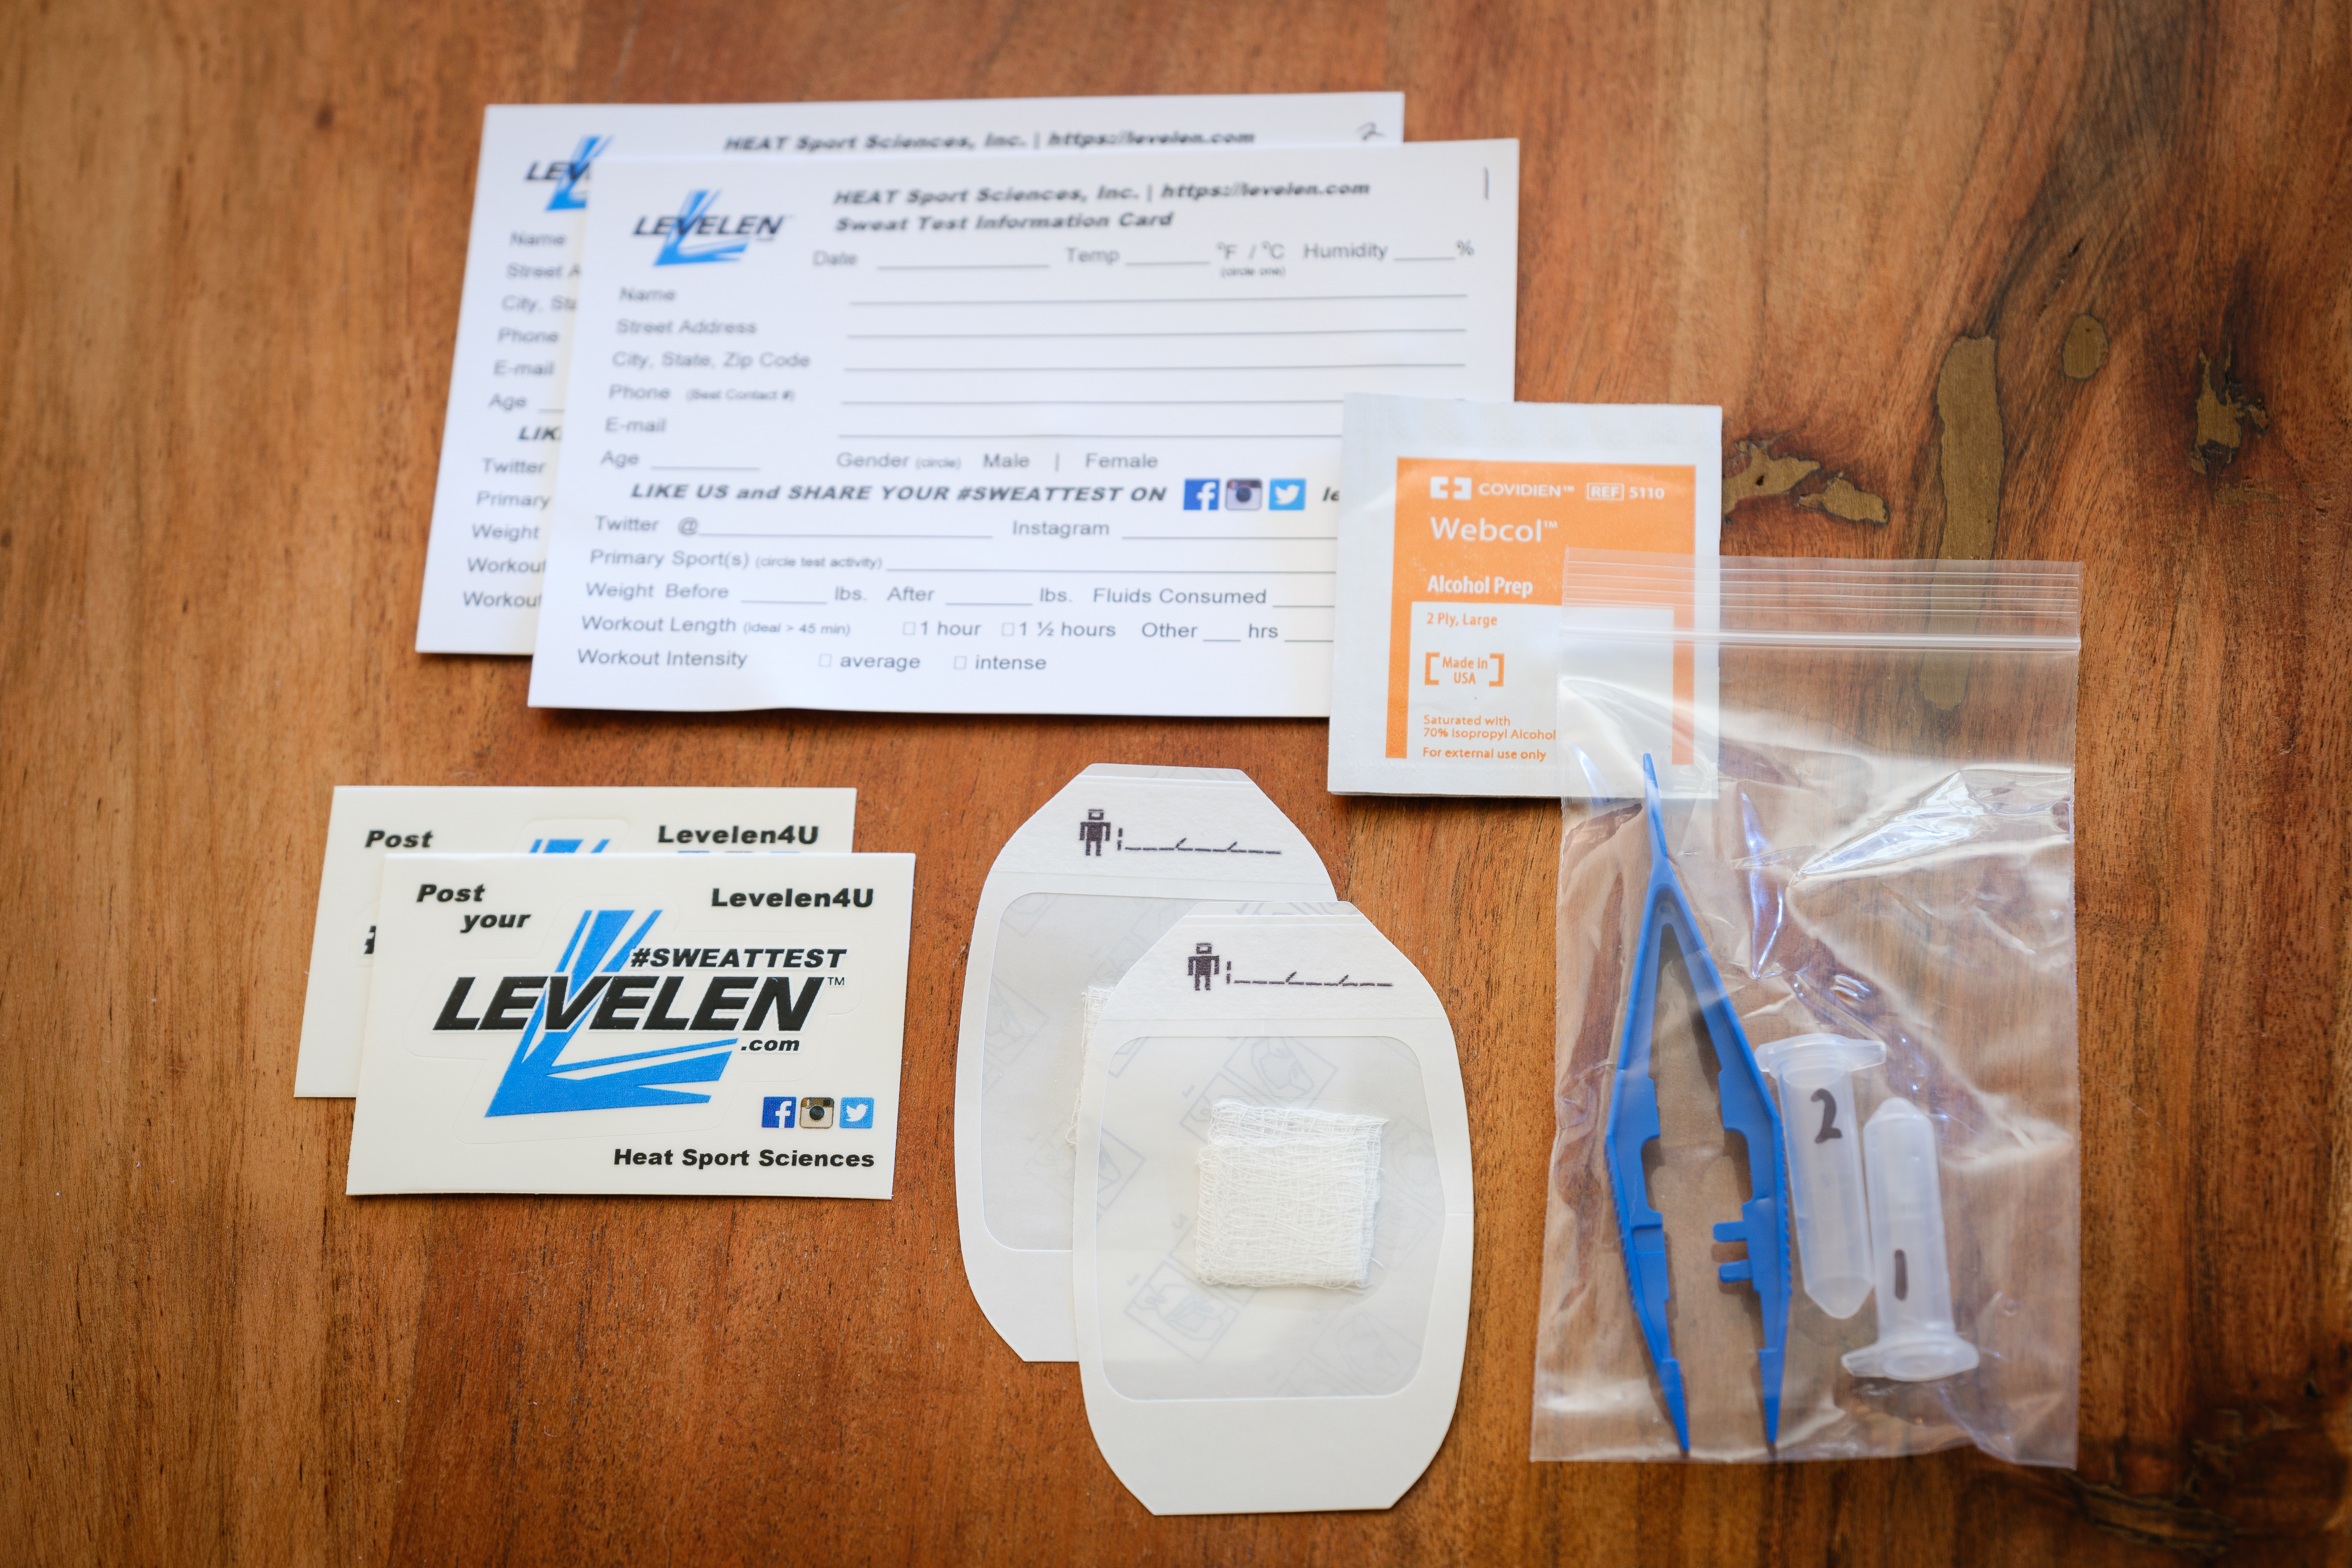 The contents of the LEVELEN sweat testing kit, including two gauze patches, two LEVELEN stickers, two cards to be filled out with the data from the test, alcohol wipes, and a plastic ziploc bag with two plastic vials and a set of plastic tweezers.